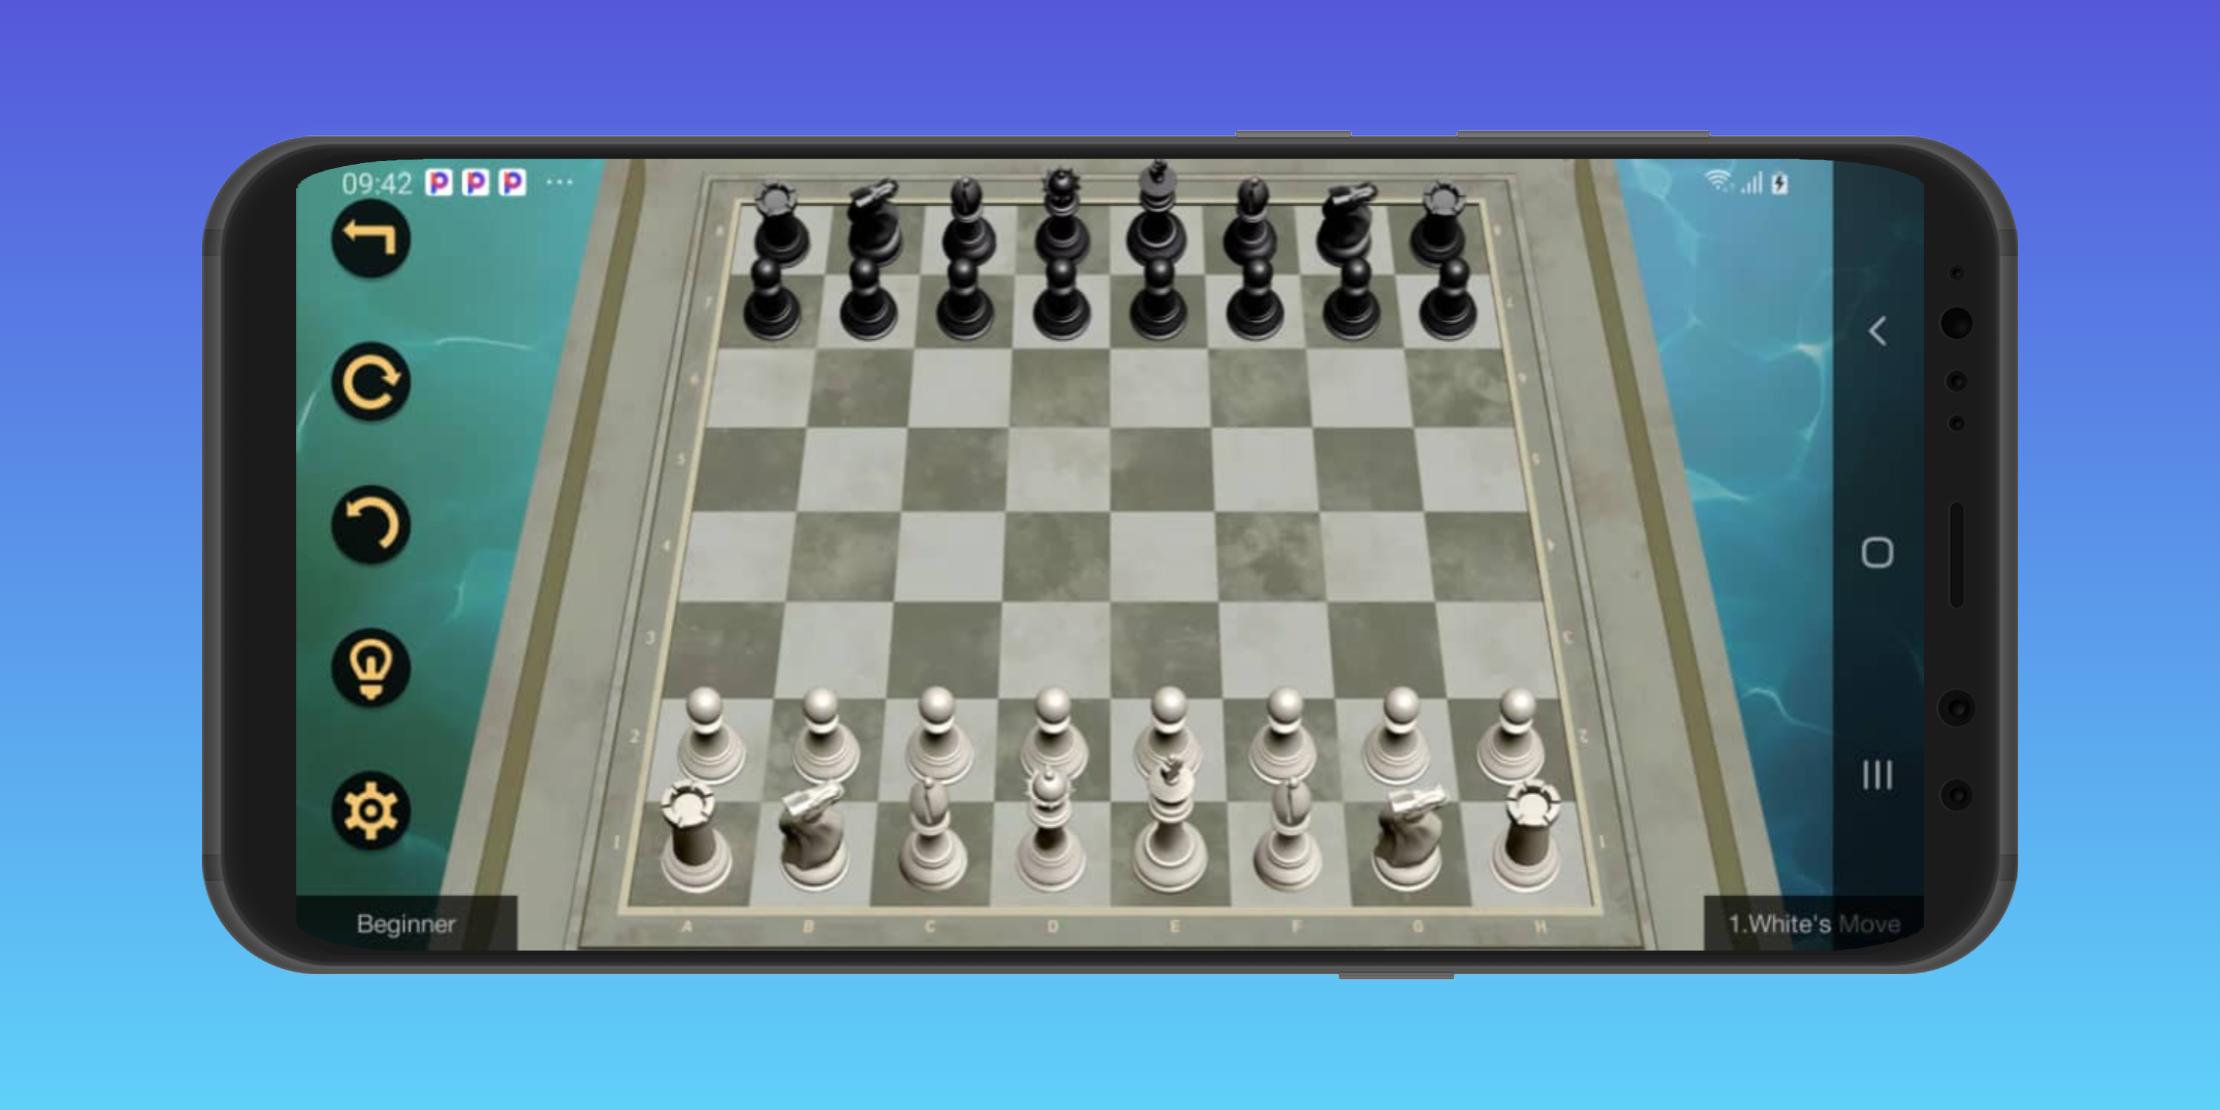 Chess Titan For Windows 11 and 10